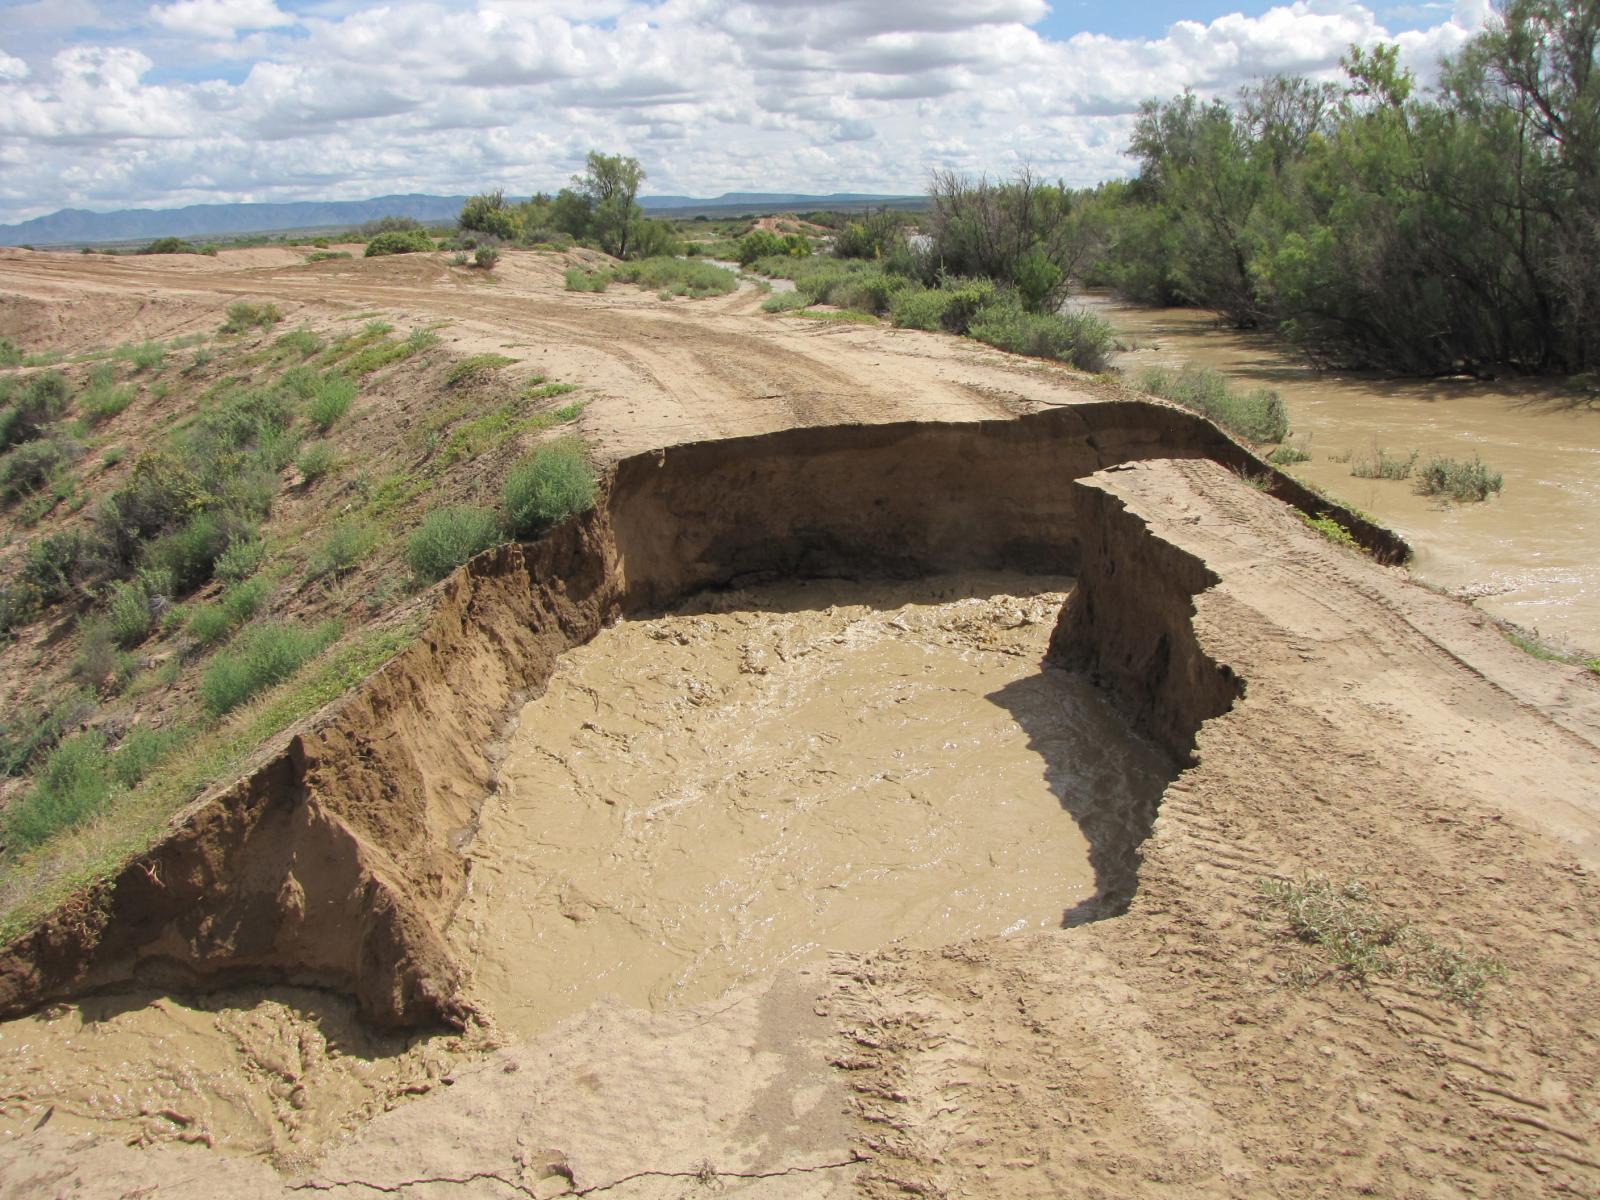 The Rio Puerco breaches its banks near the small community of San Francisico, causing damage to a road.